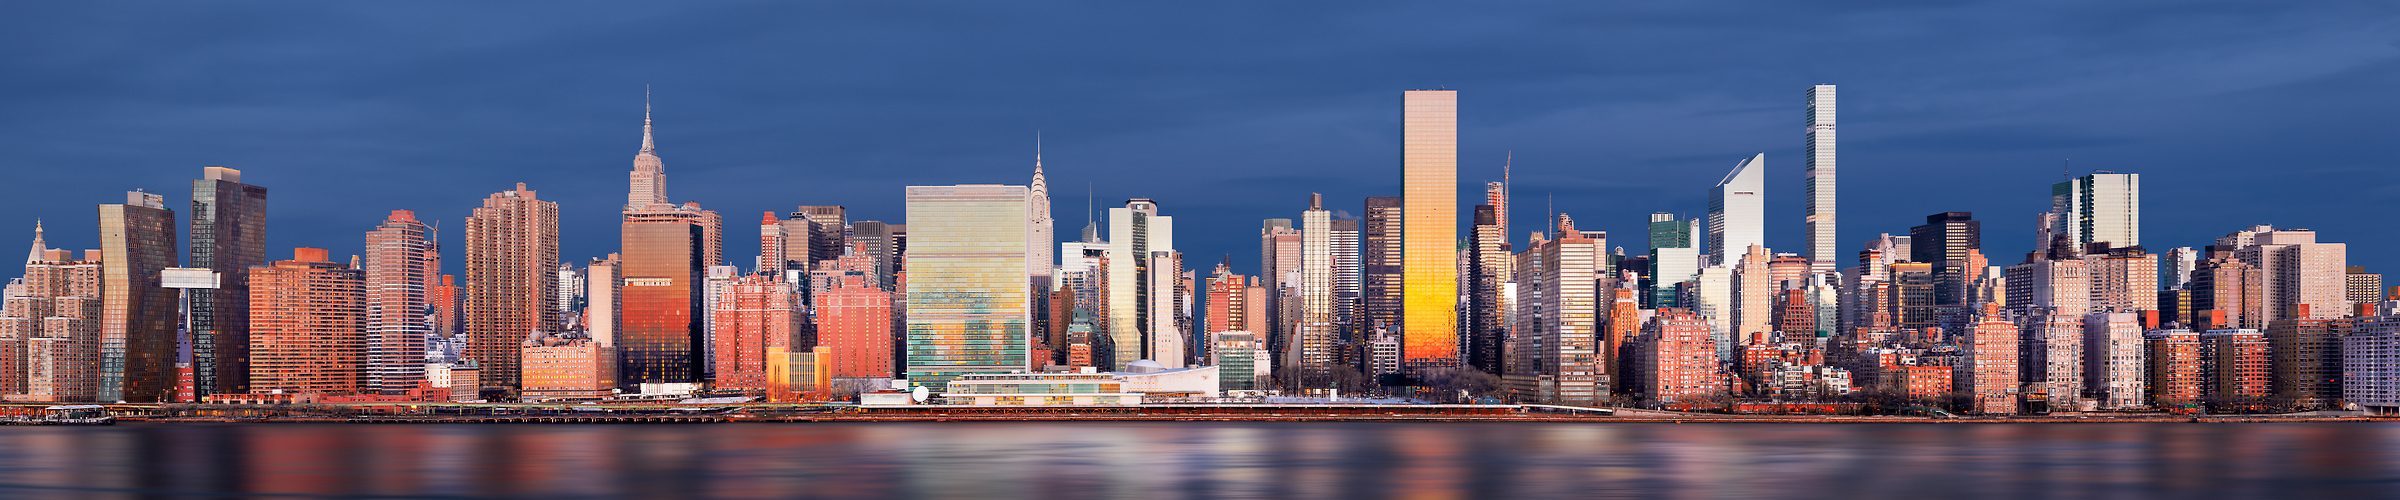 1,632 megapixels! A very high resolution, large-format panorama of the New York City skyline; gigapixel photograph created by Dan Piech in Manhattan.